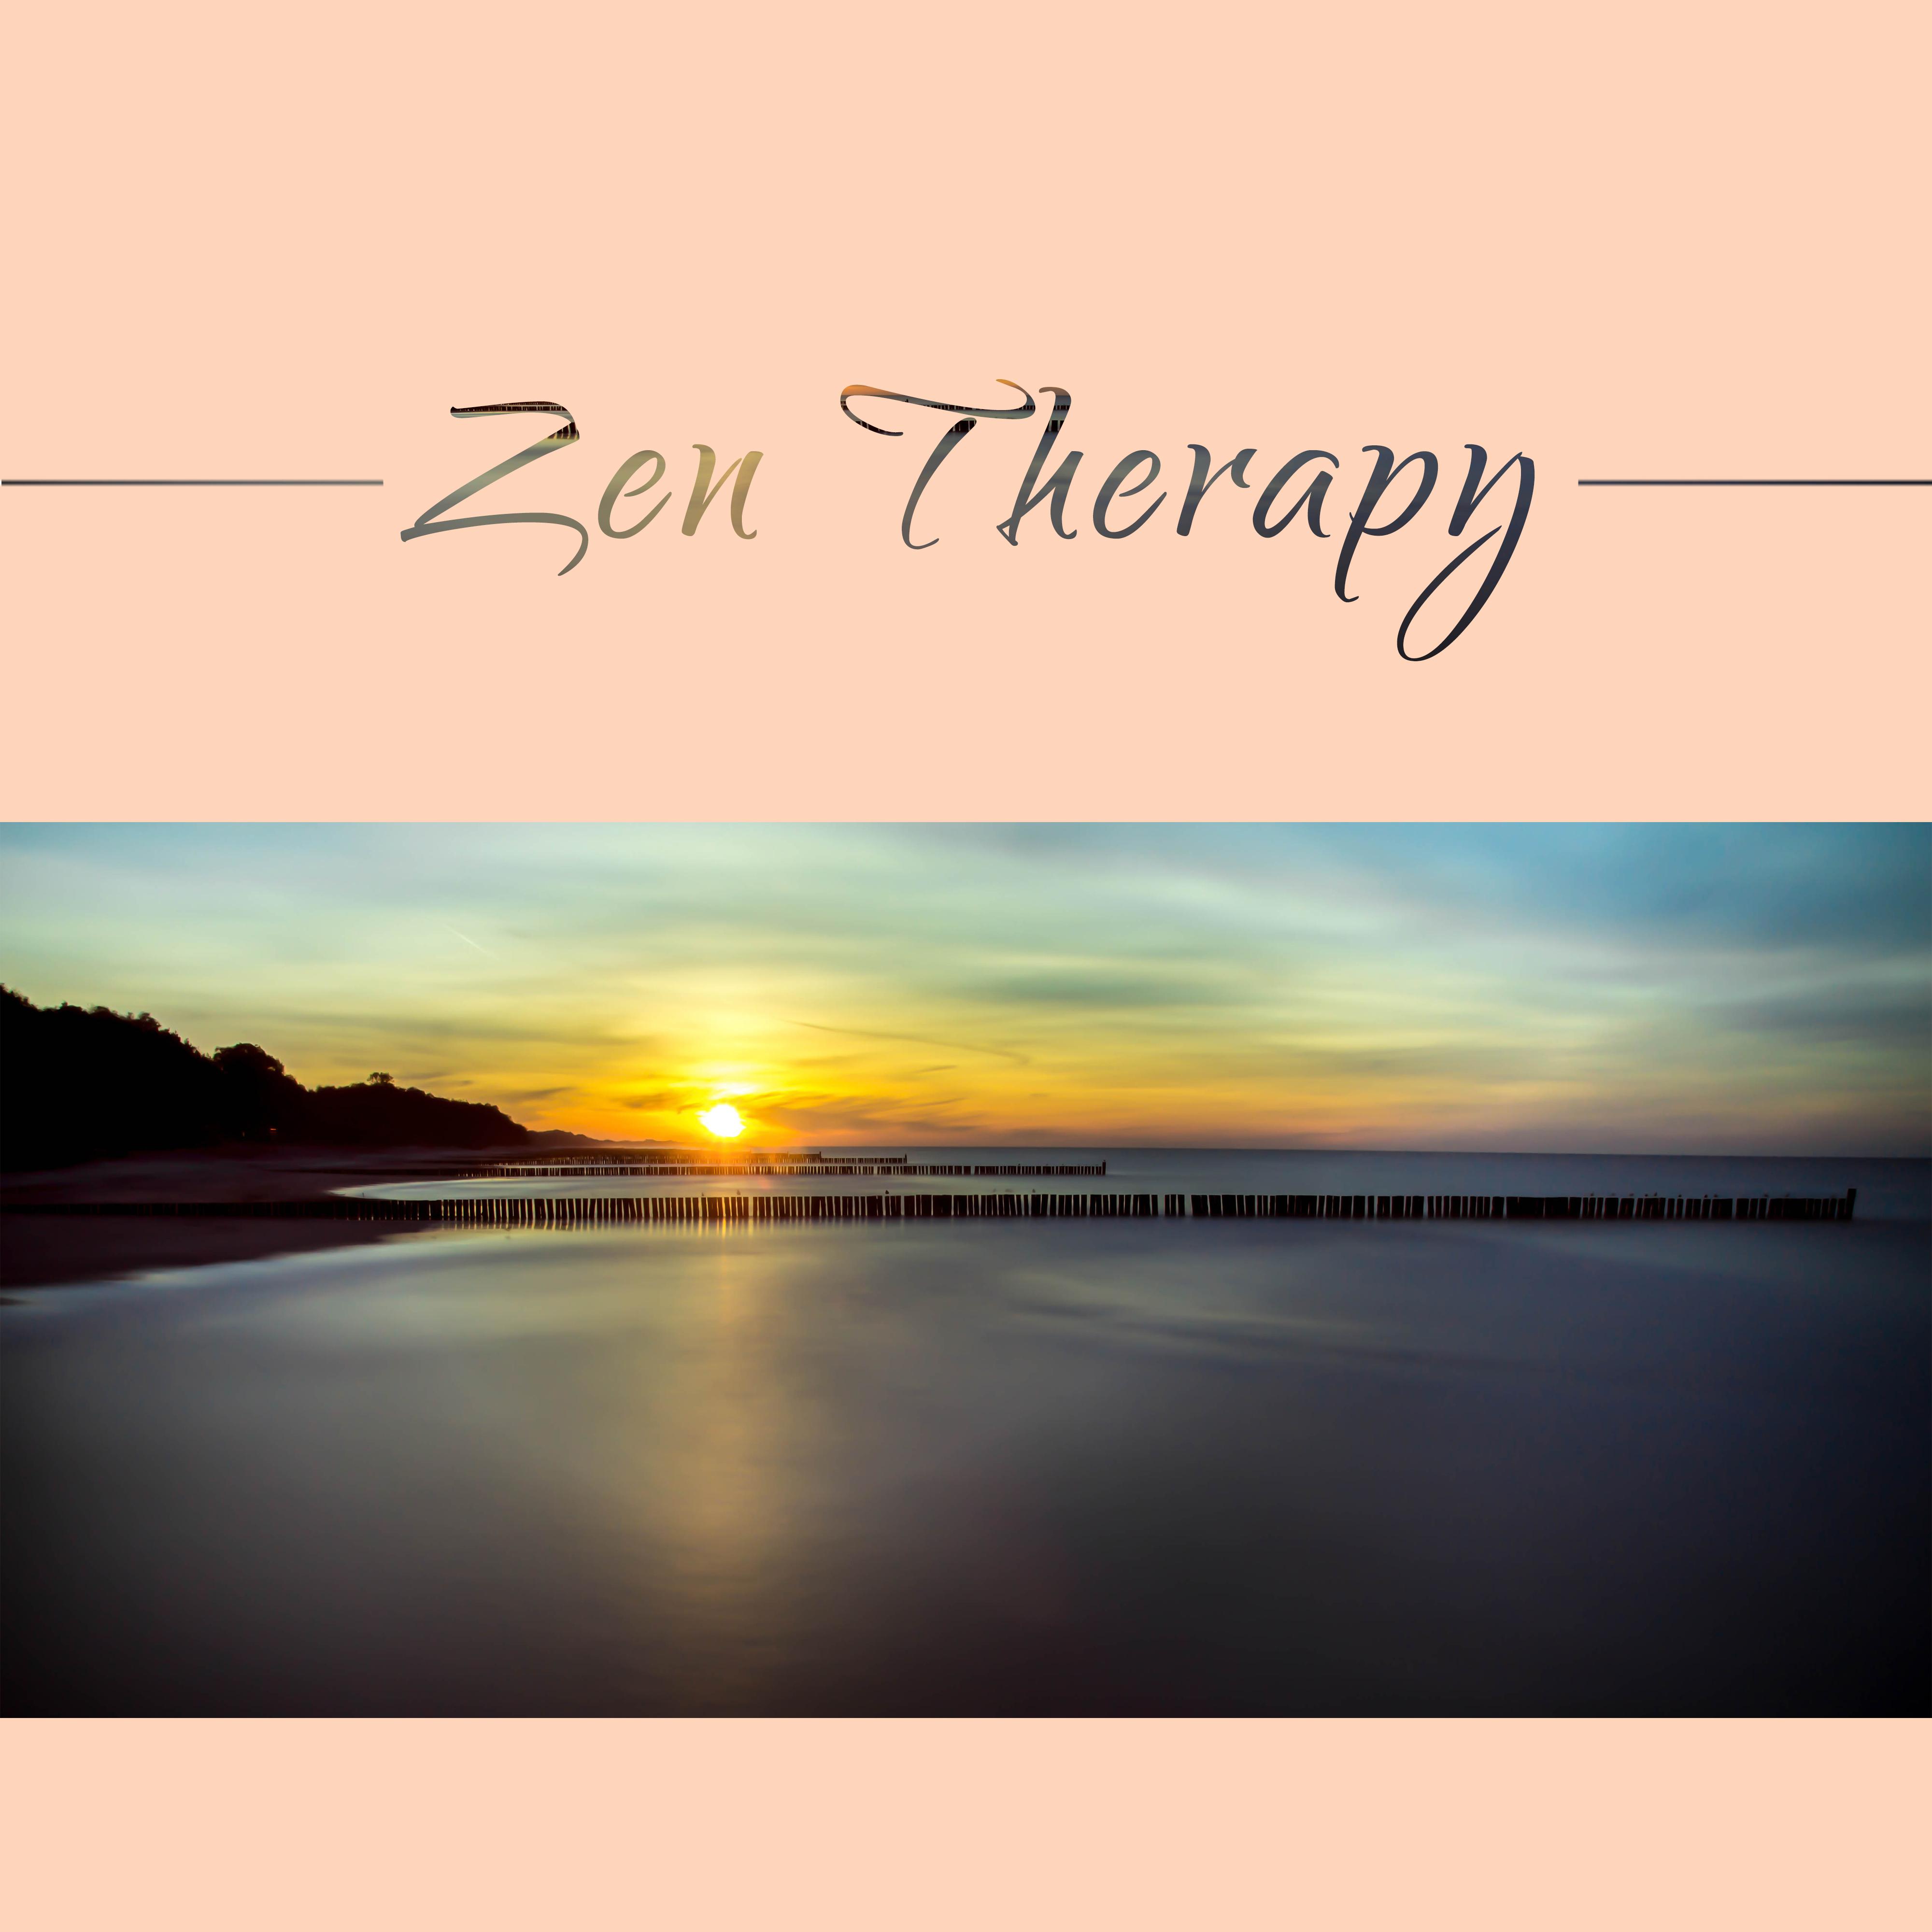 Zen Therapy – New Age, Relaxing Music, Healing Sounds of Nature for Relief Stress, Reduce Anxiety, Feel Better